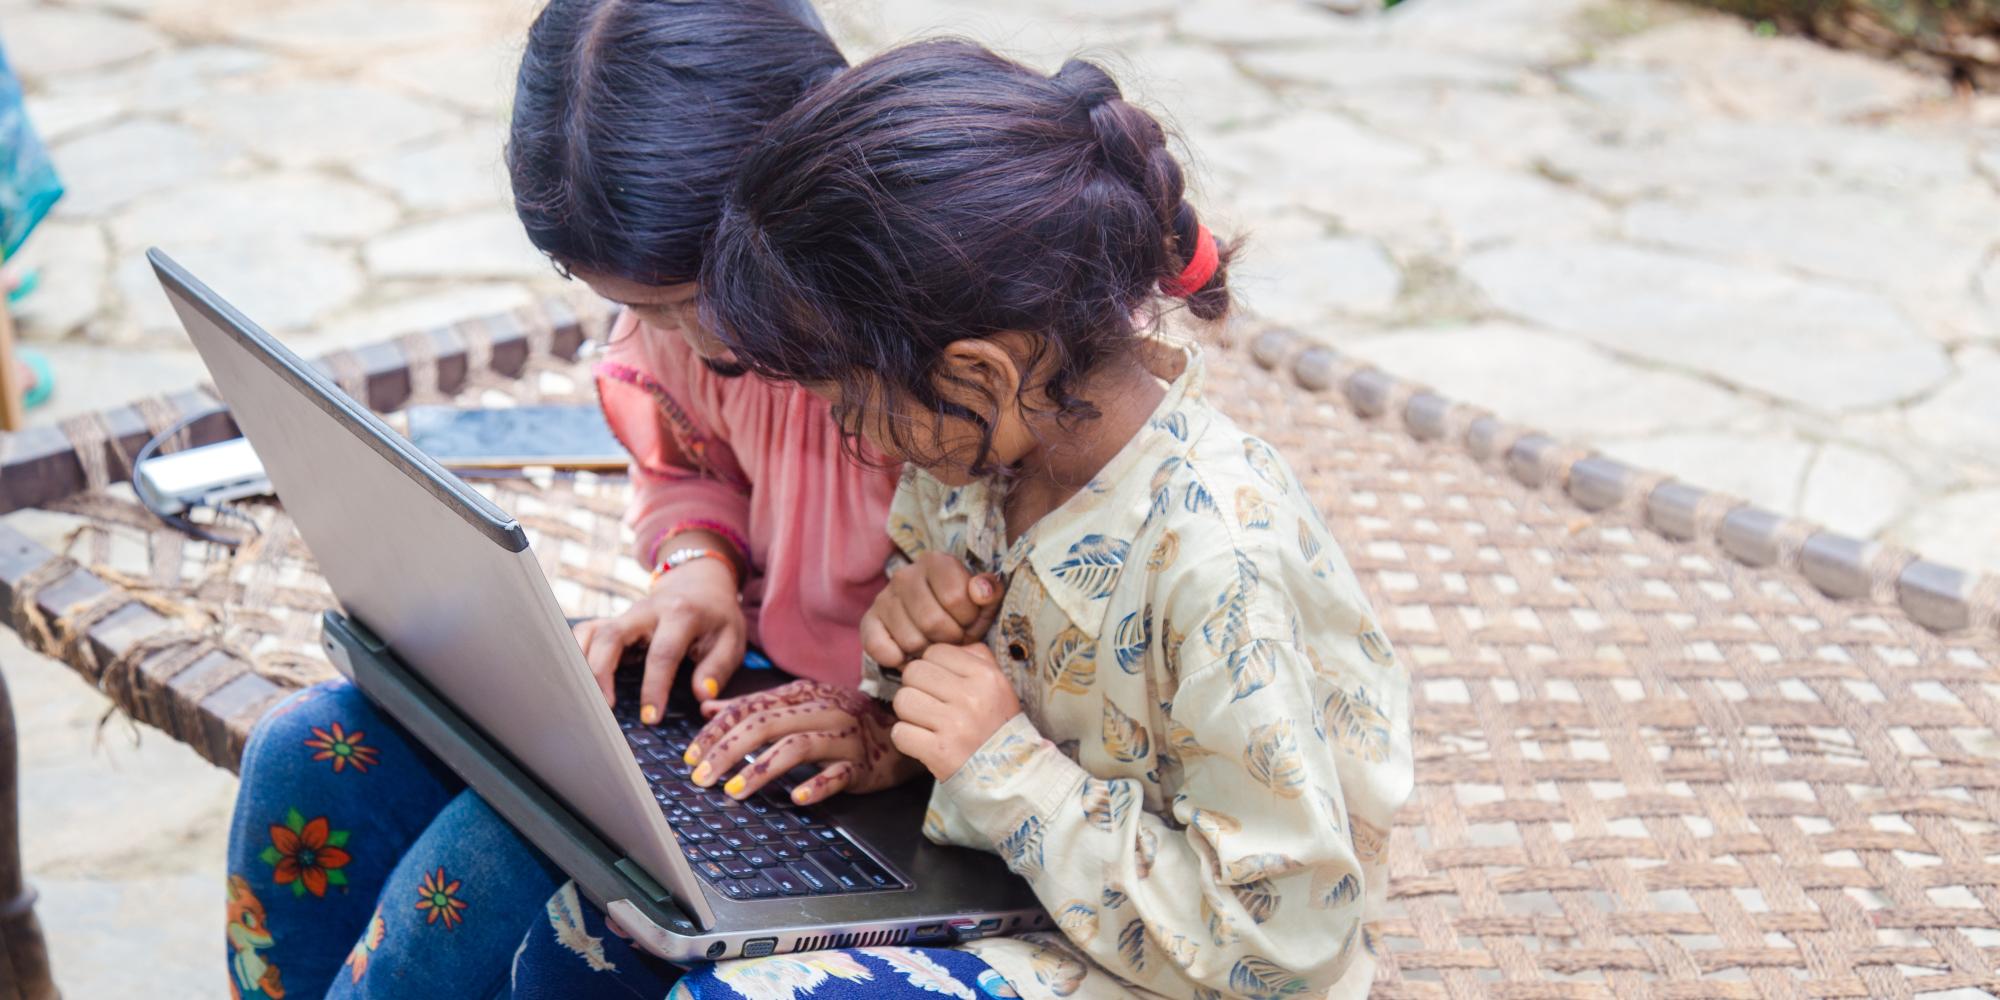 Two girls sitting on the pavement, looking at a computer.